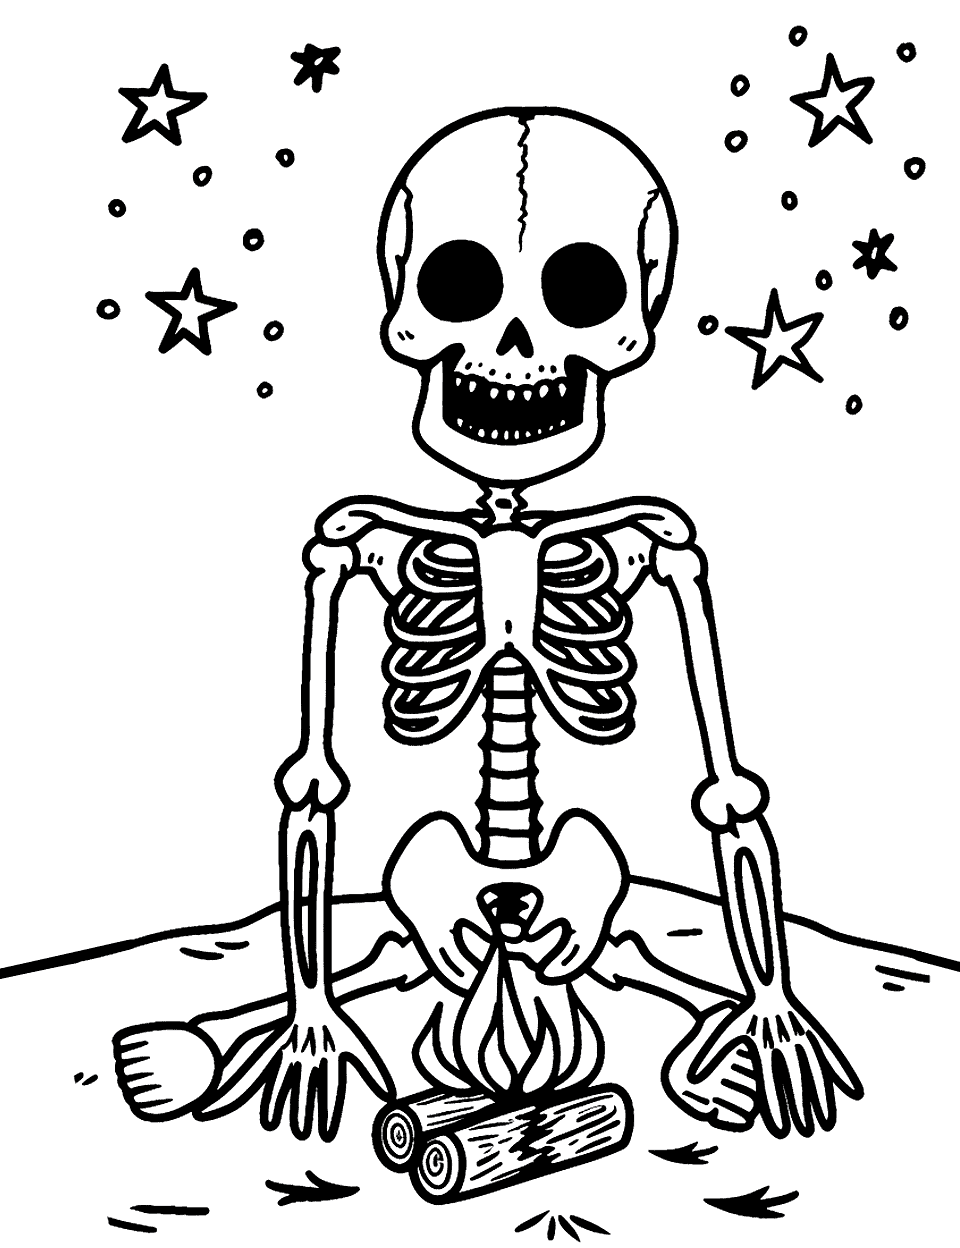 Skeleton Sitting by a Campfire Coloring Page - A skeleton warming its bones by a campfire under the stars.